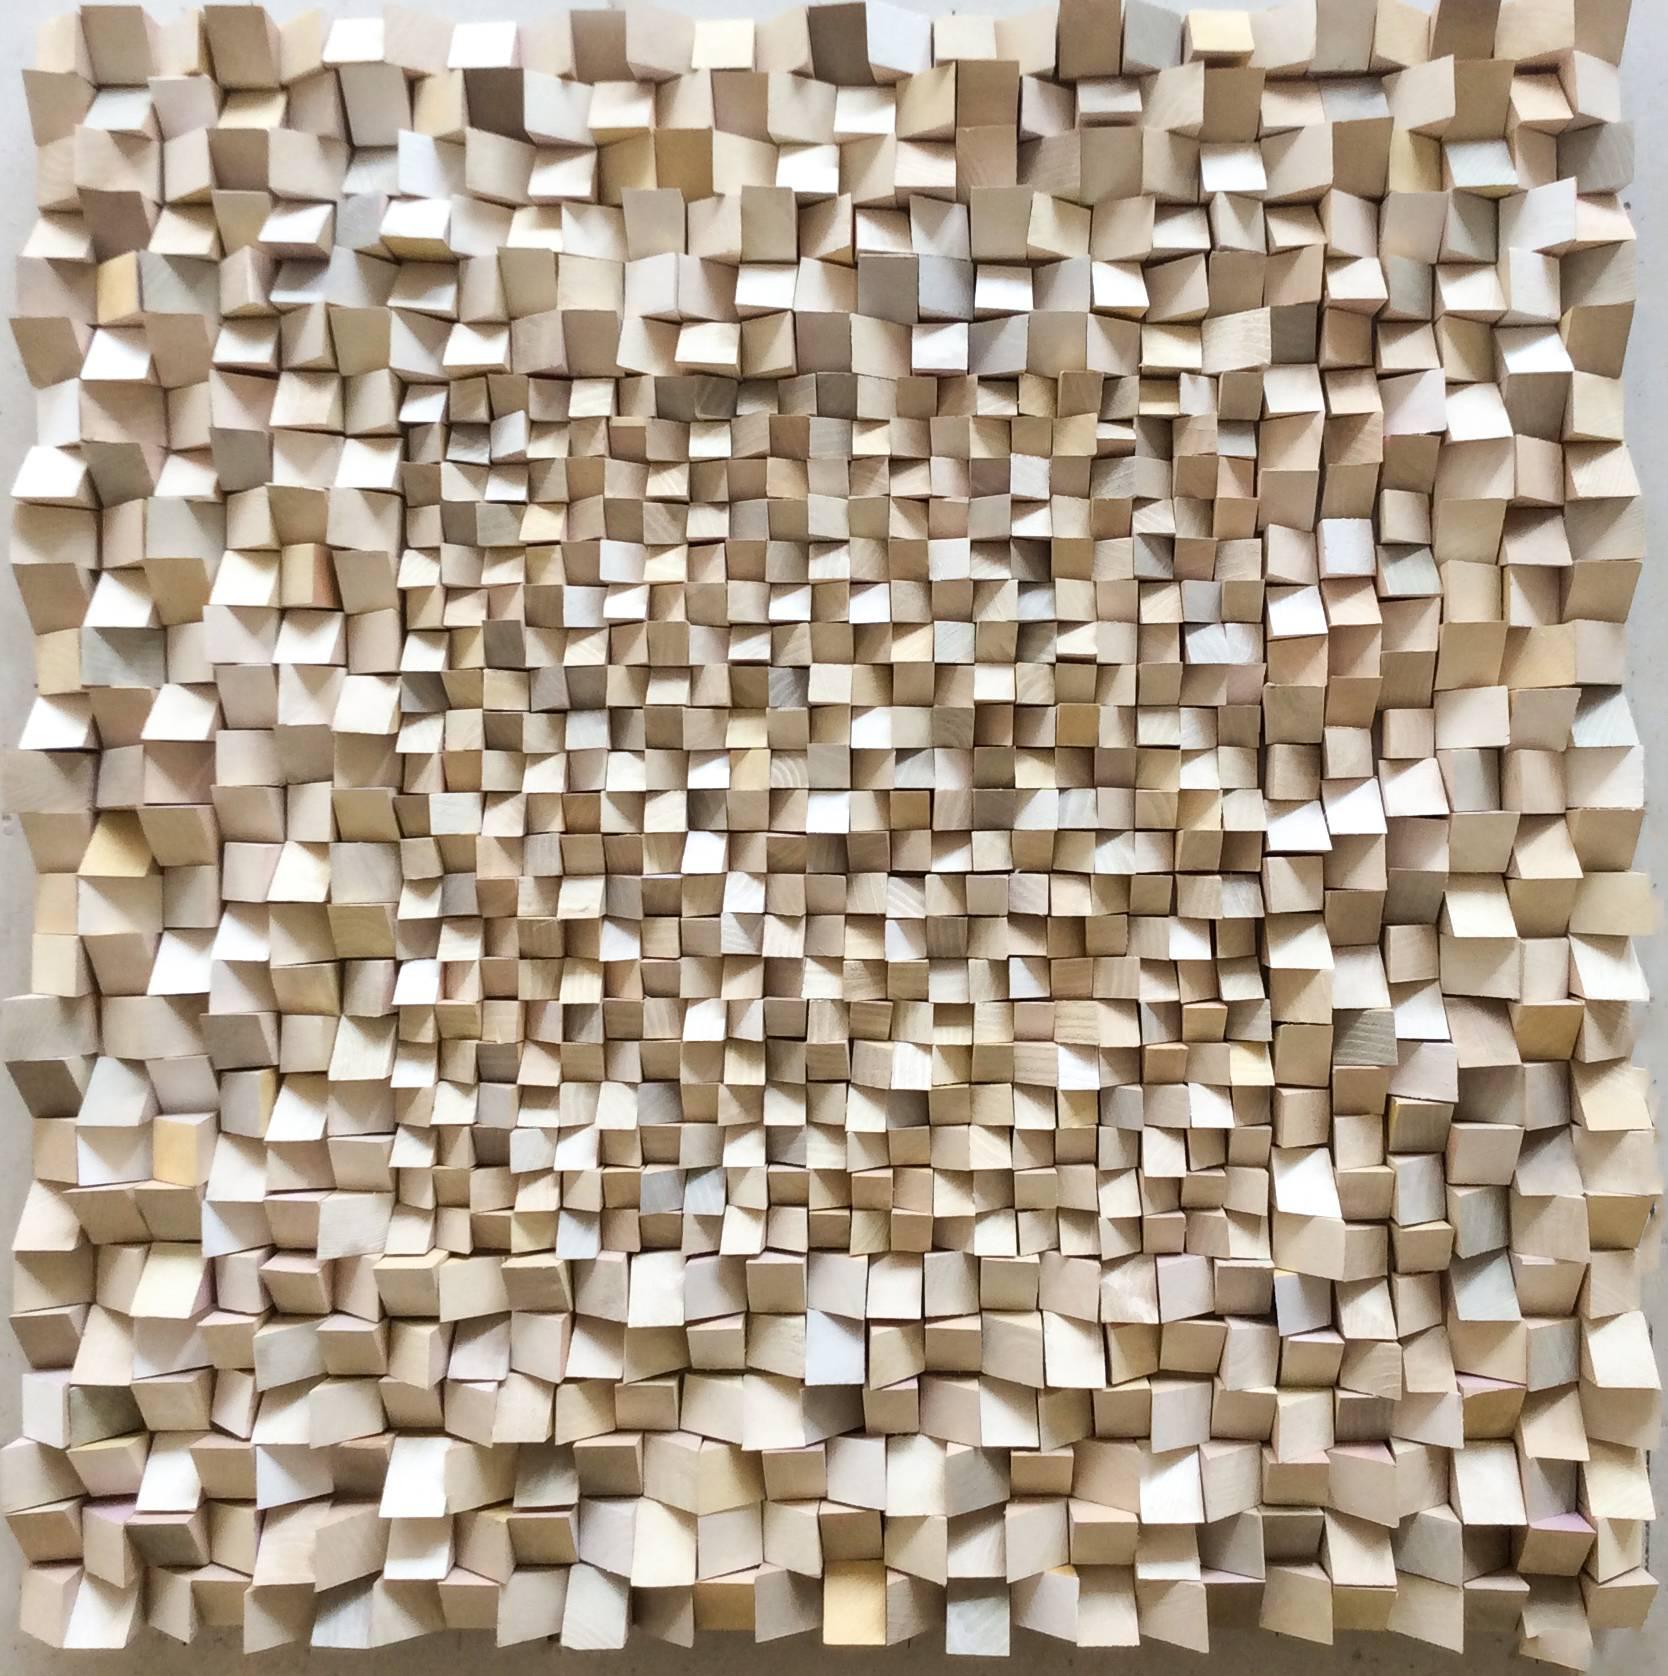 Multi-Faceted (Neutral Abstract Mid-Century Modern 3D Wooden Wall Sculpture) - Mixed Media Art by Stephen Walling